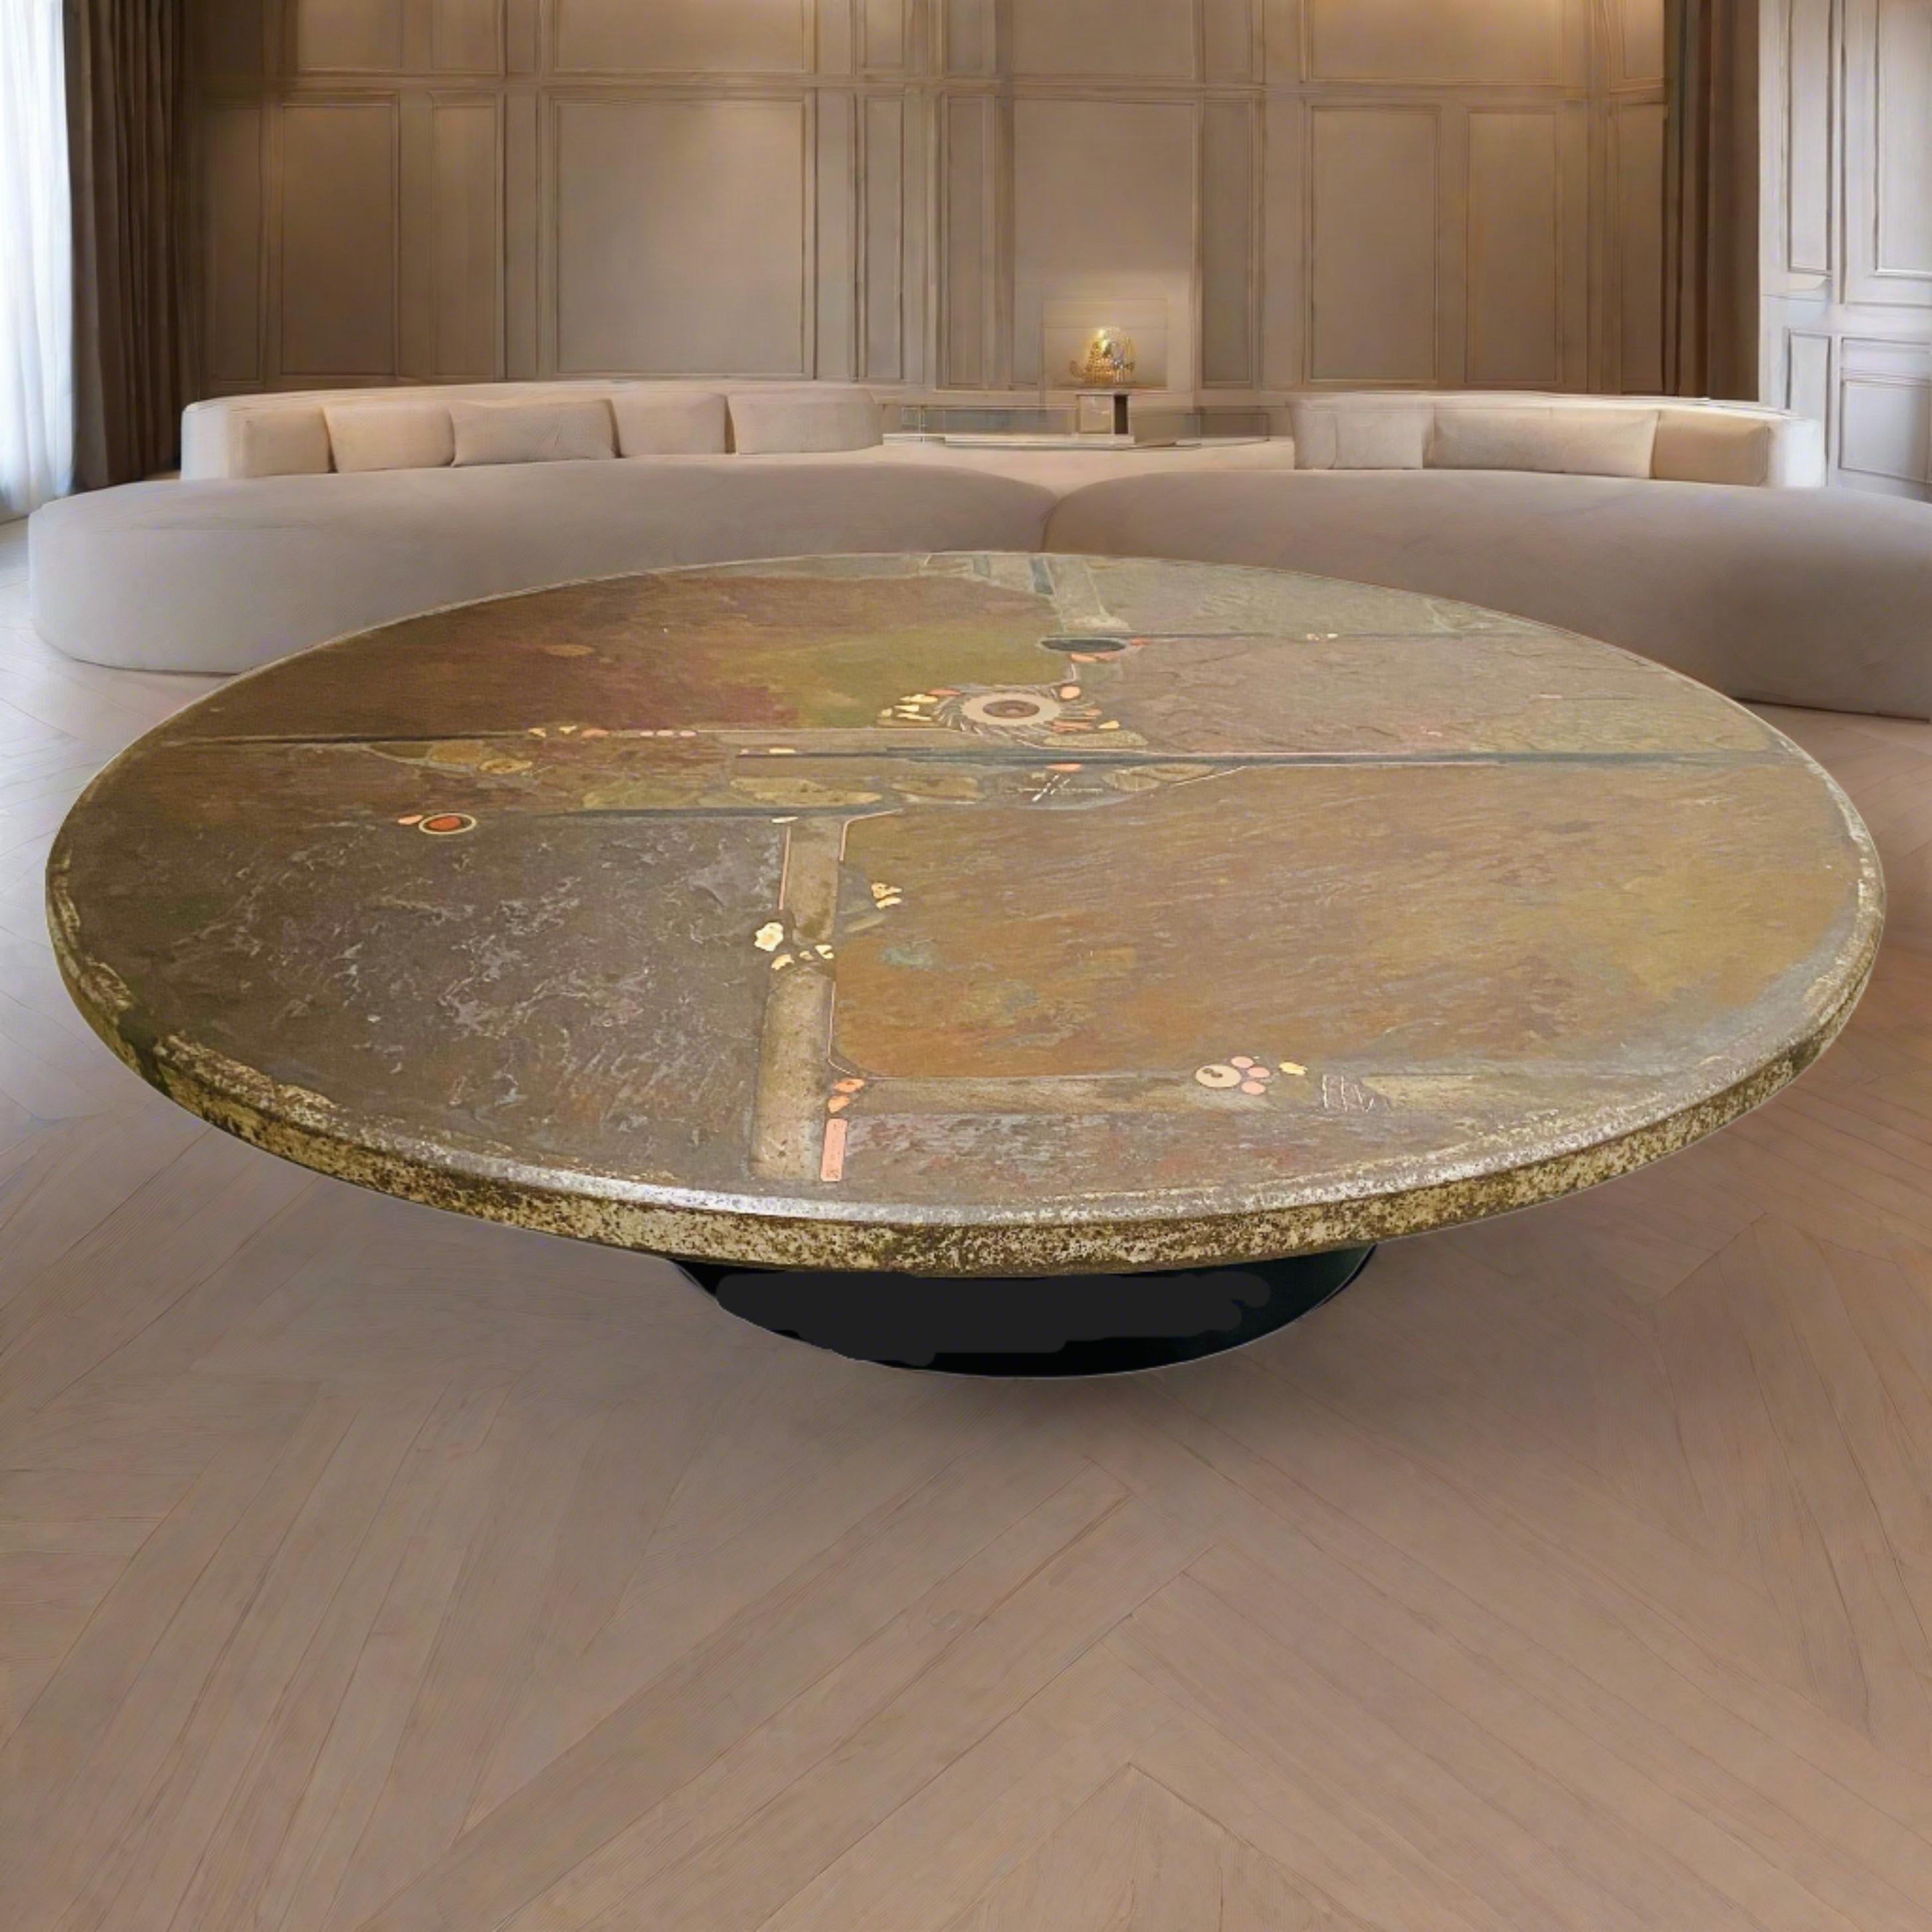 Brutalist coffee table designed and made by Paul Kingma, The Netherlands 1985.

Introducing the Brutalist Round Coffee Table by renowned sculptor Paul Kingma, crafted in the Netherlands in 1985. This iconic piece is a testament to Kingma's unique